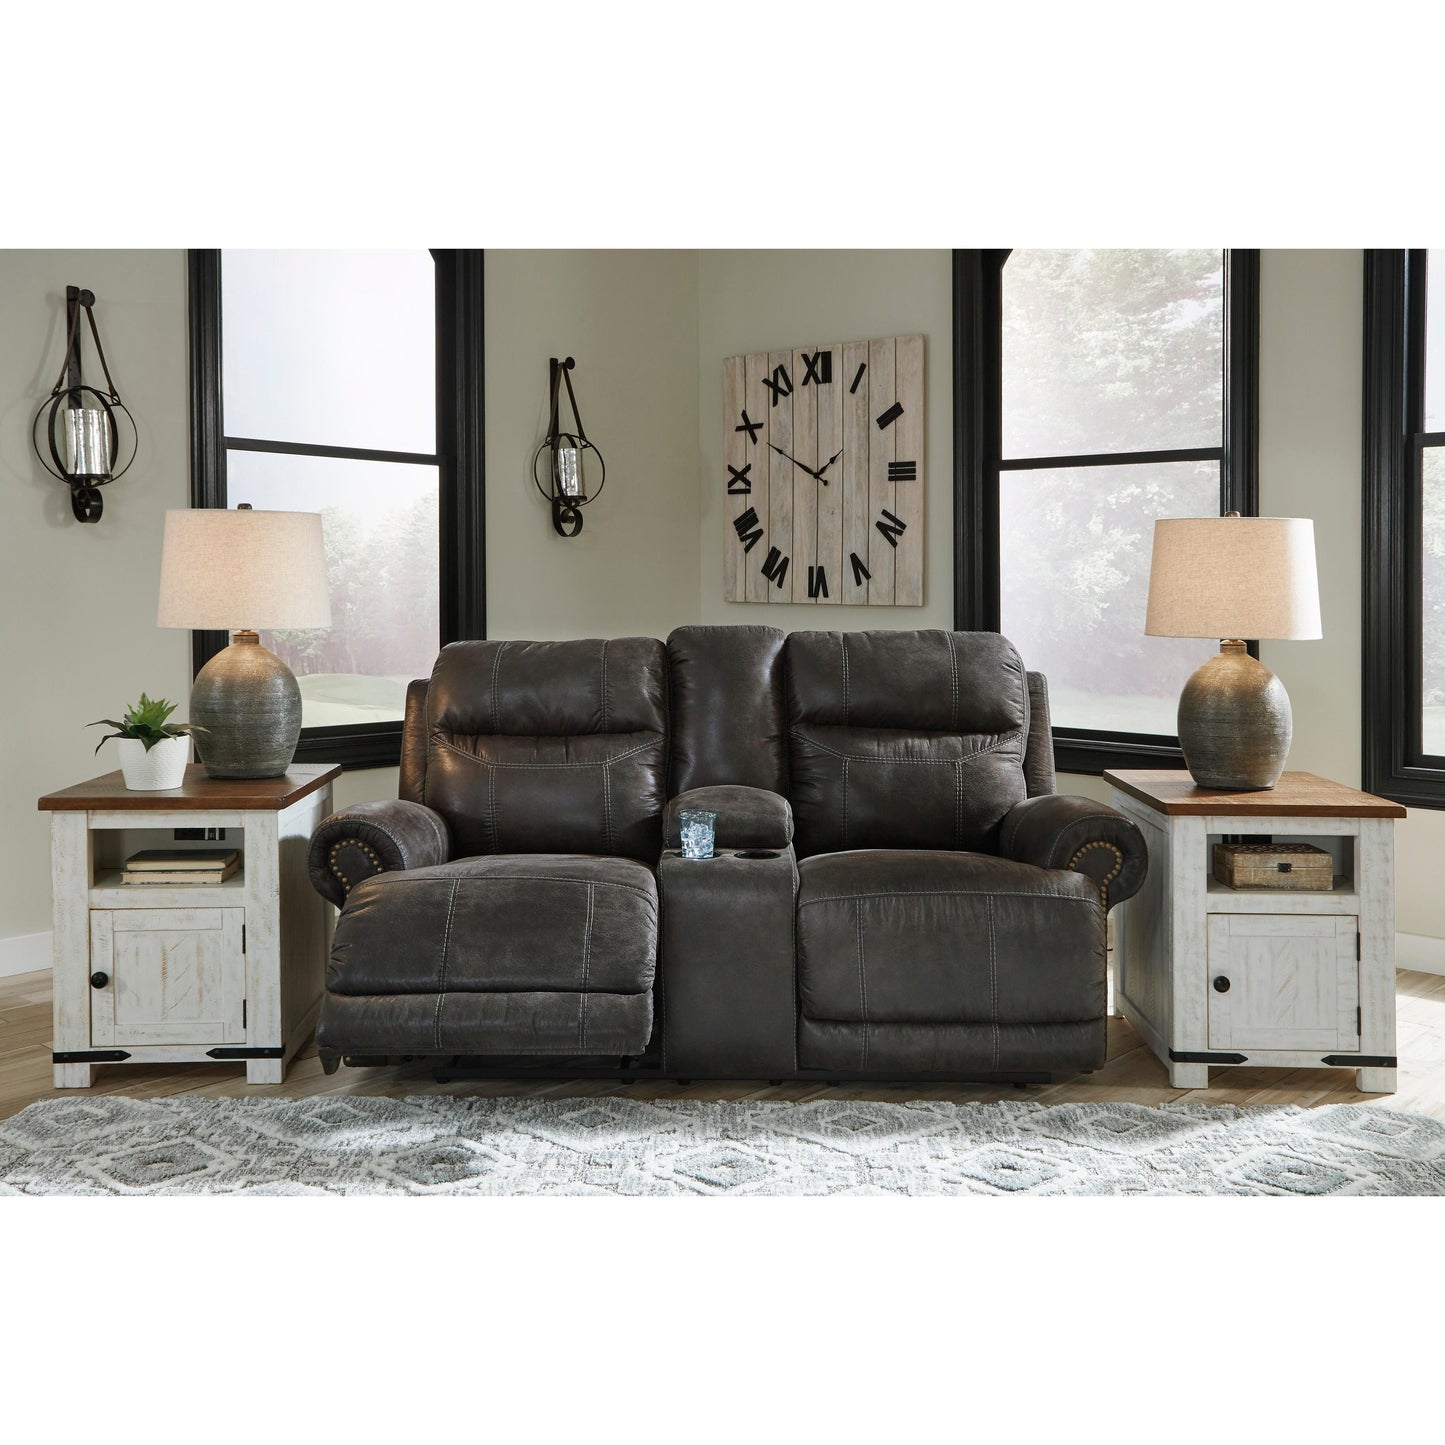 Signature Design by Ashley Grearview 65005U1 2 pc Power Reclining Living Room Set IMAGE 4